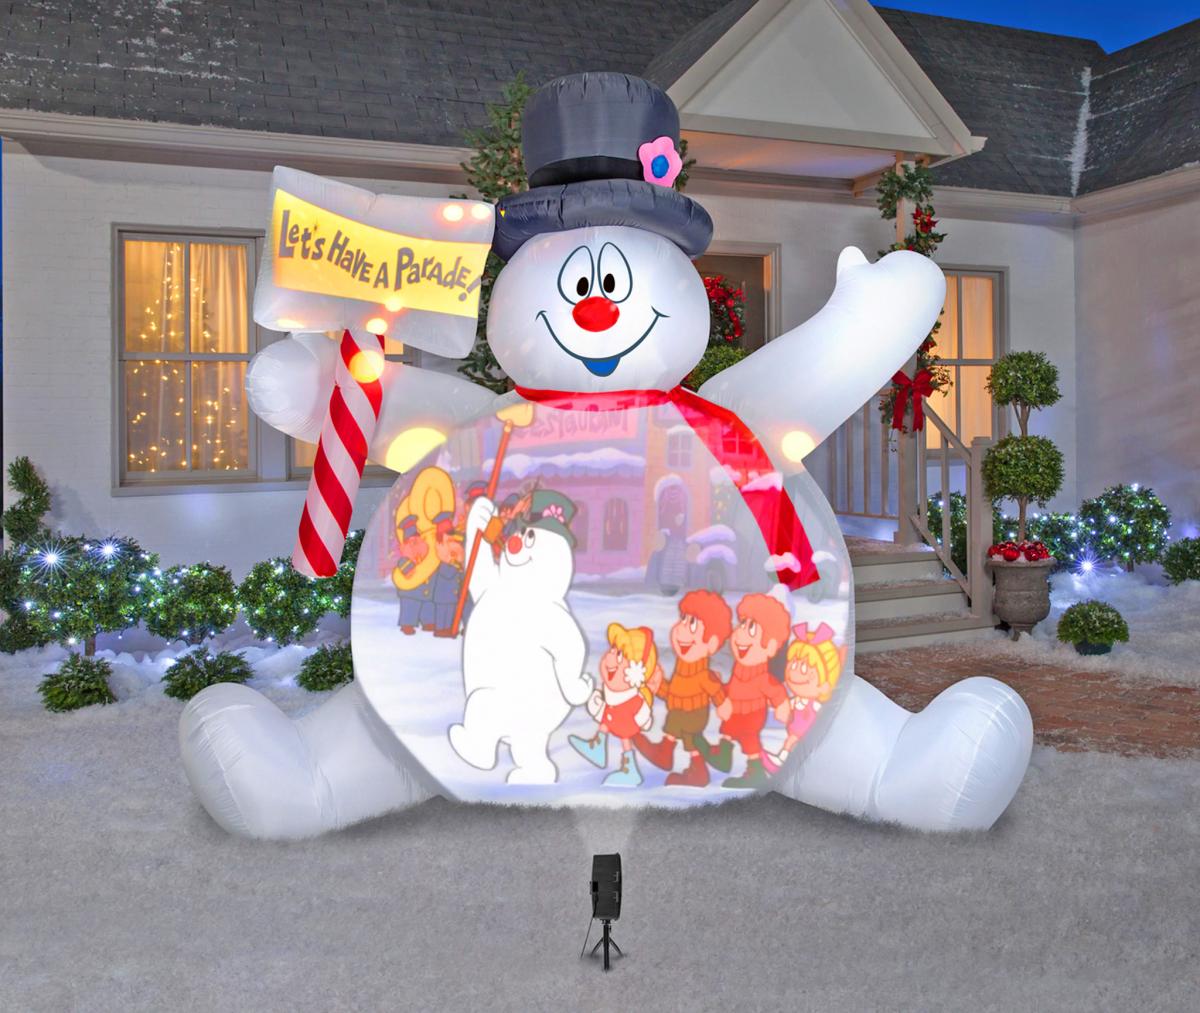 Giant Inflatable Frosty The Snowman Plays Movies On His Belly - Frosty movie projection screen